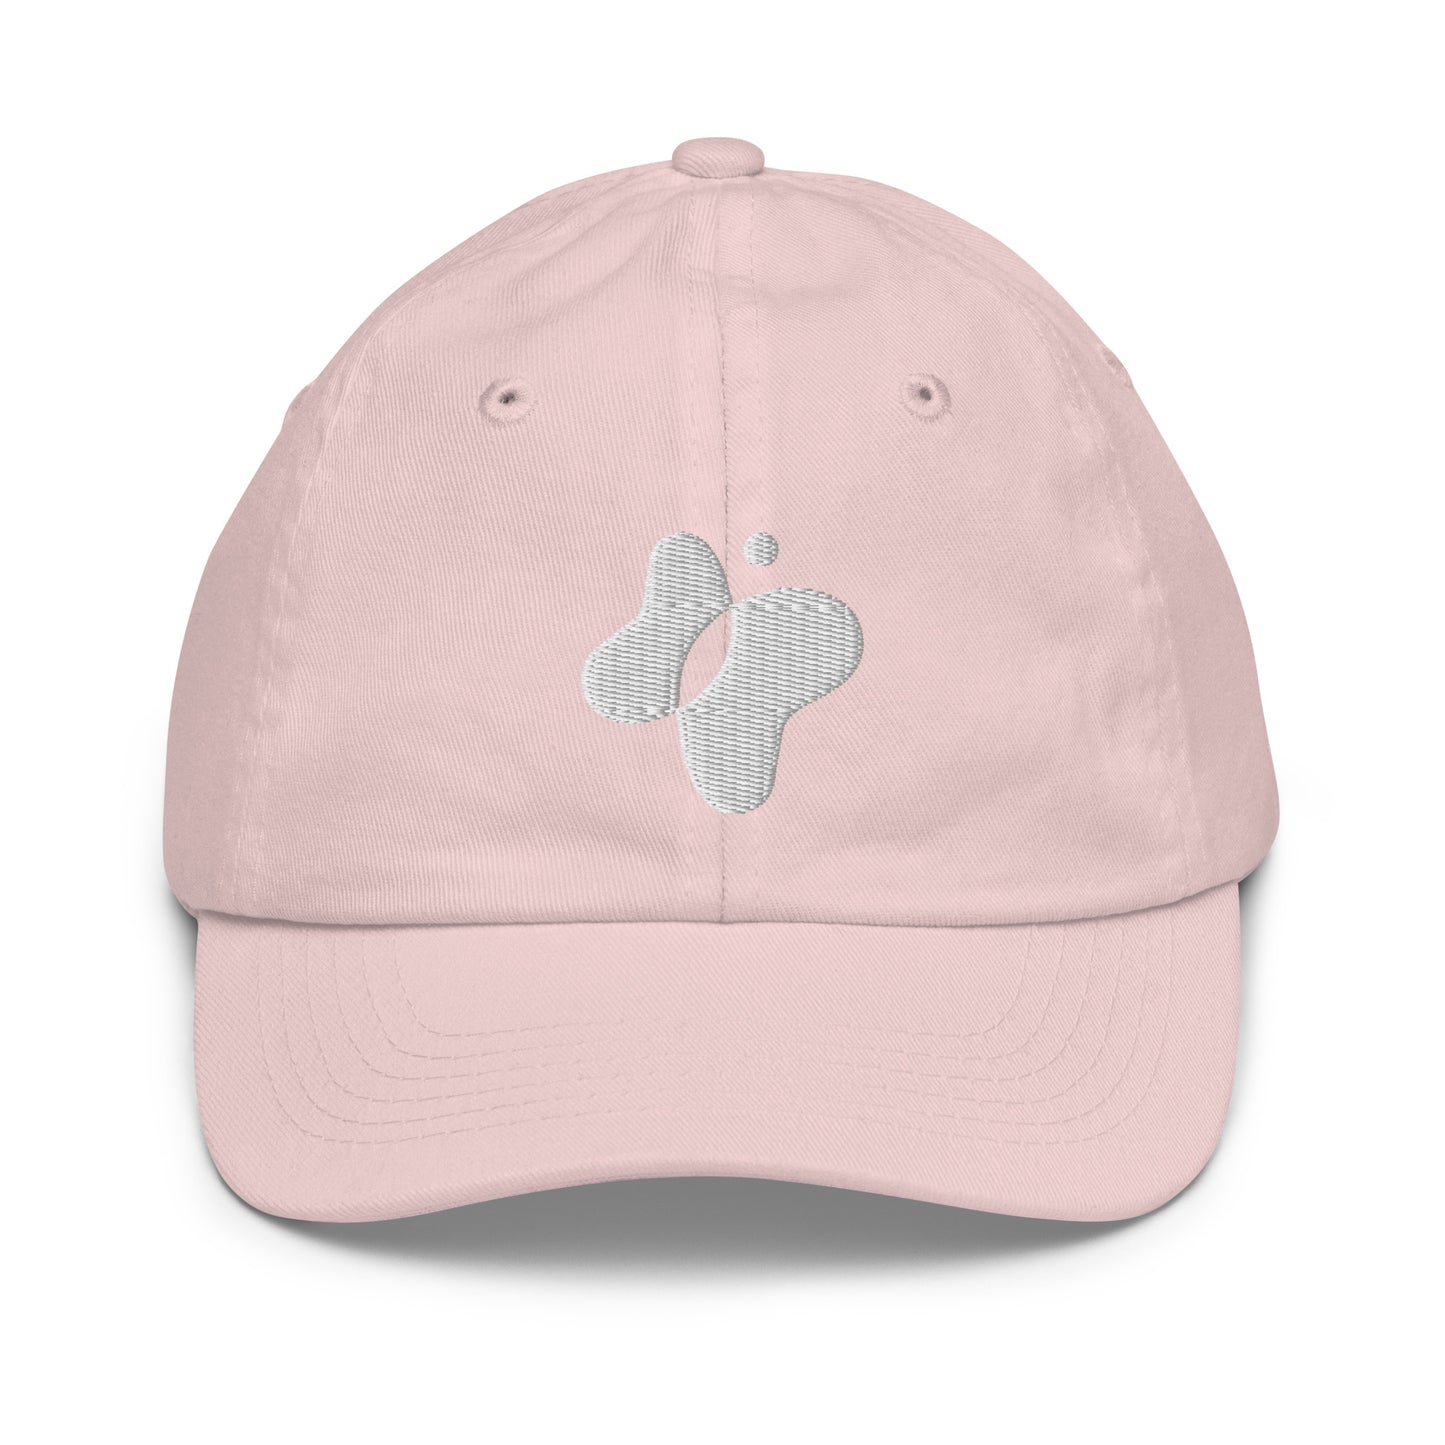 Butterfly Youth baseball cap